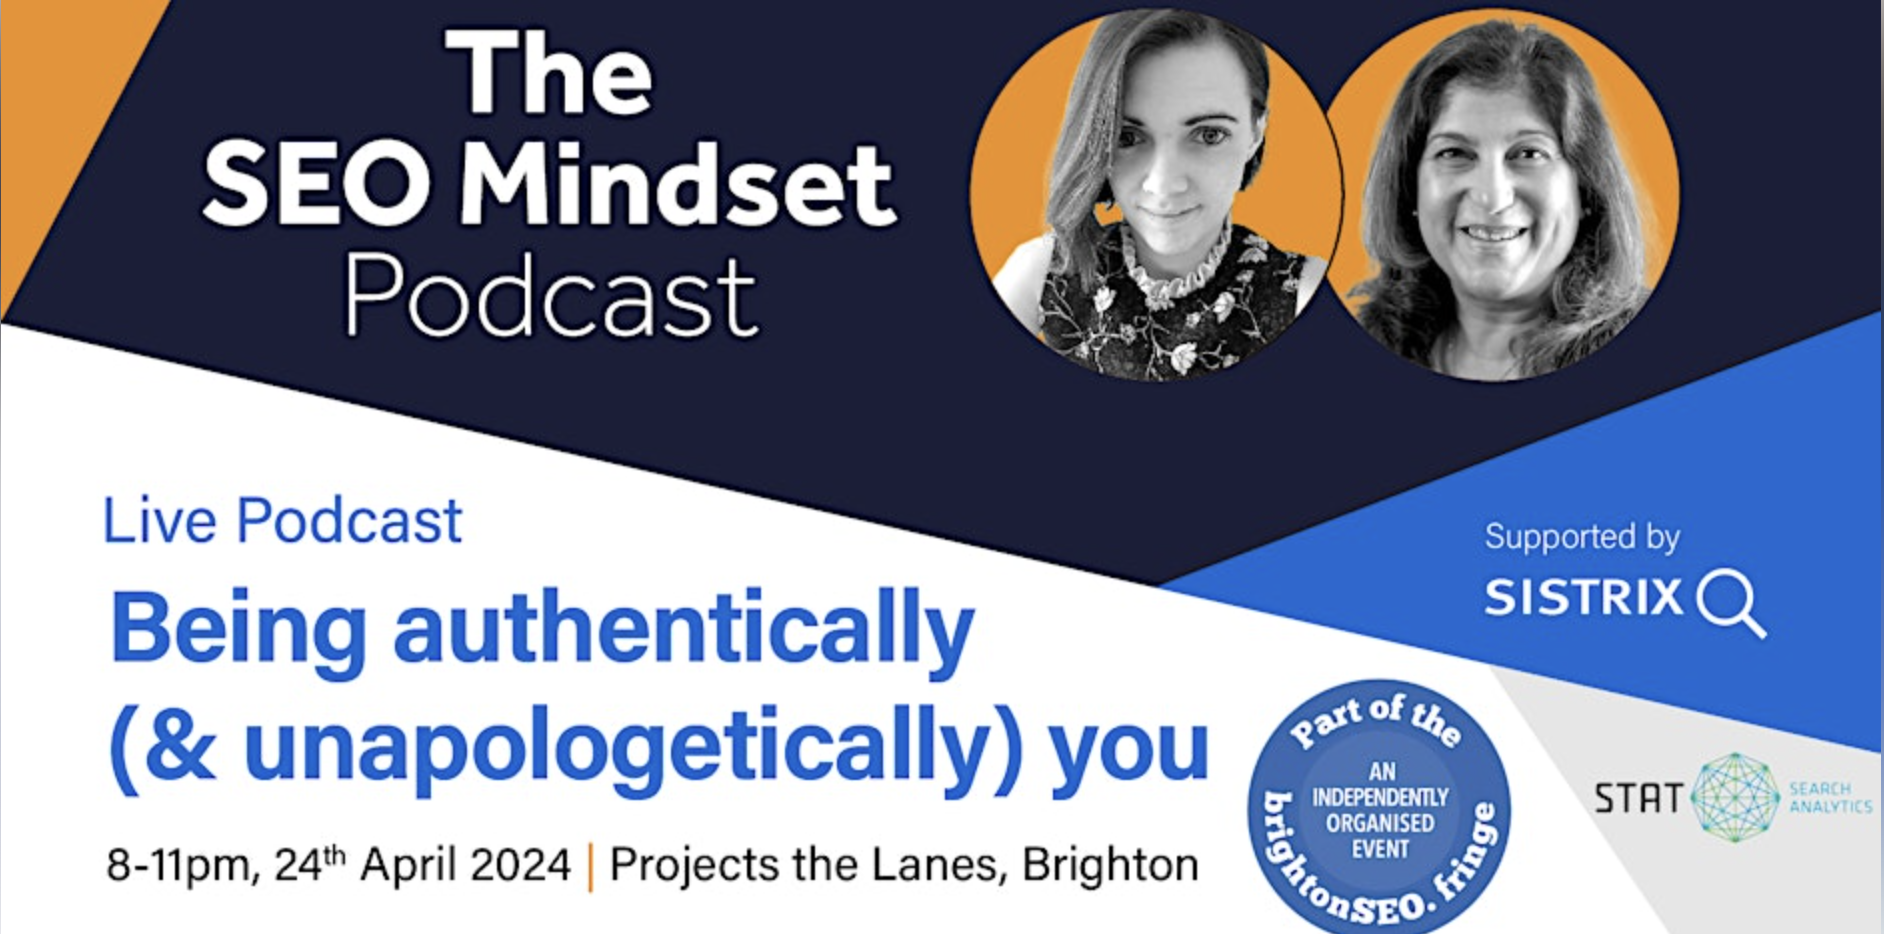 Importance of Being Authentically You: Live Podcast